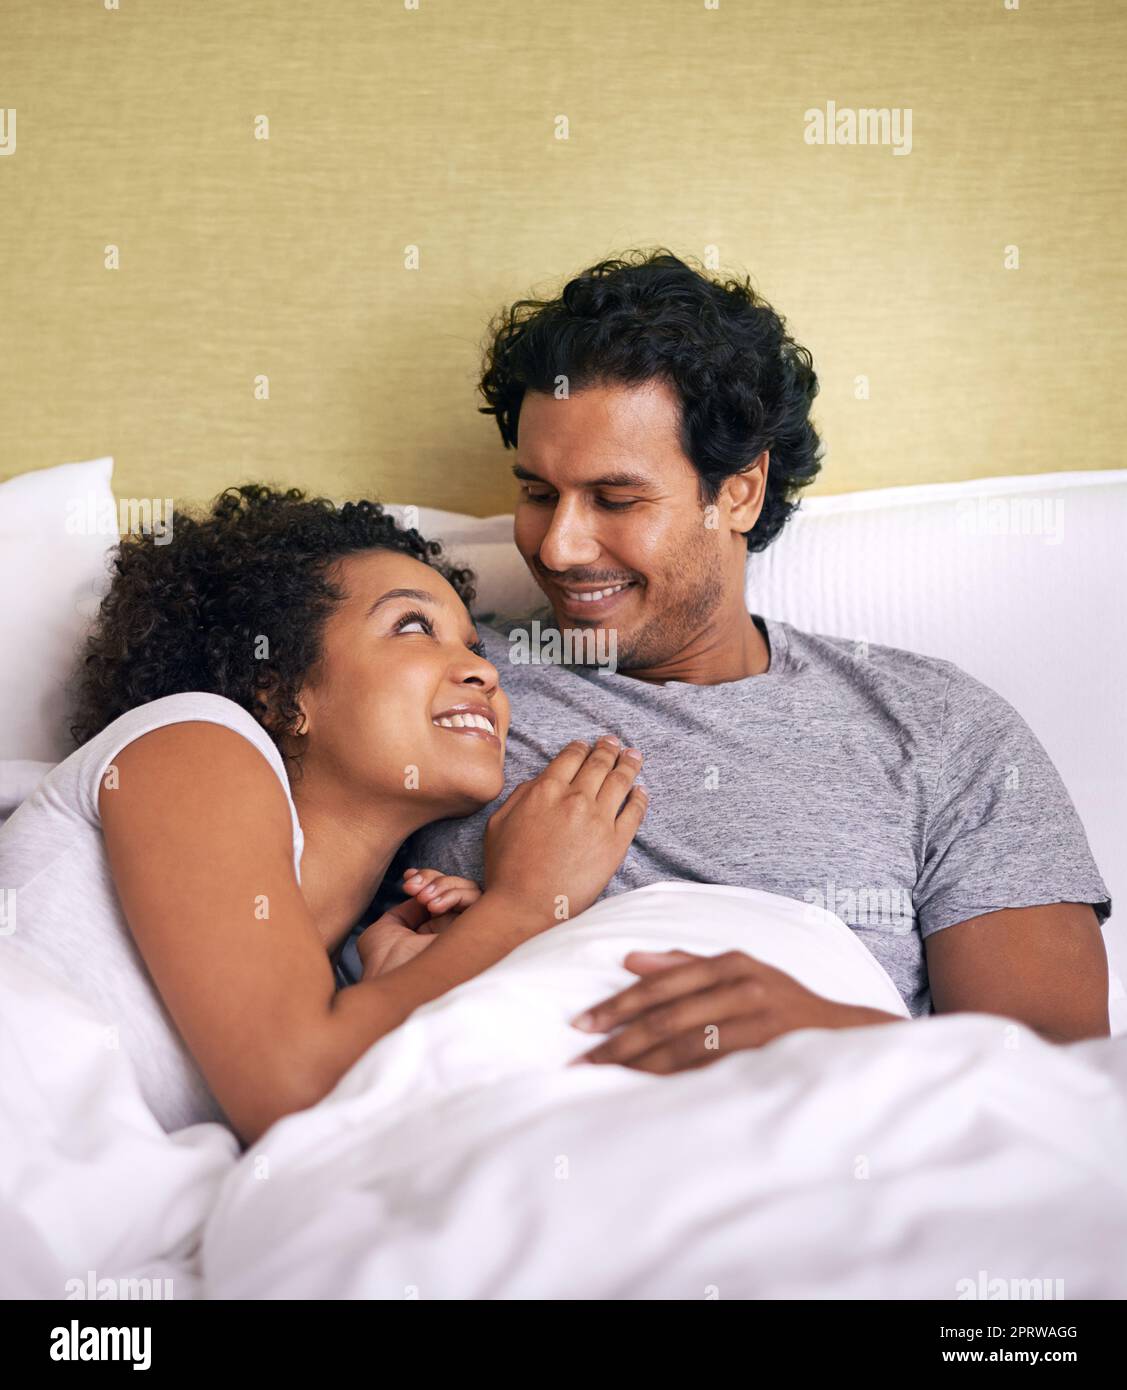 Cuddling with my hubby. A young husband and wife lying bed together. Stock Photo